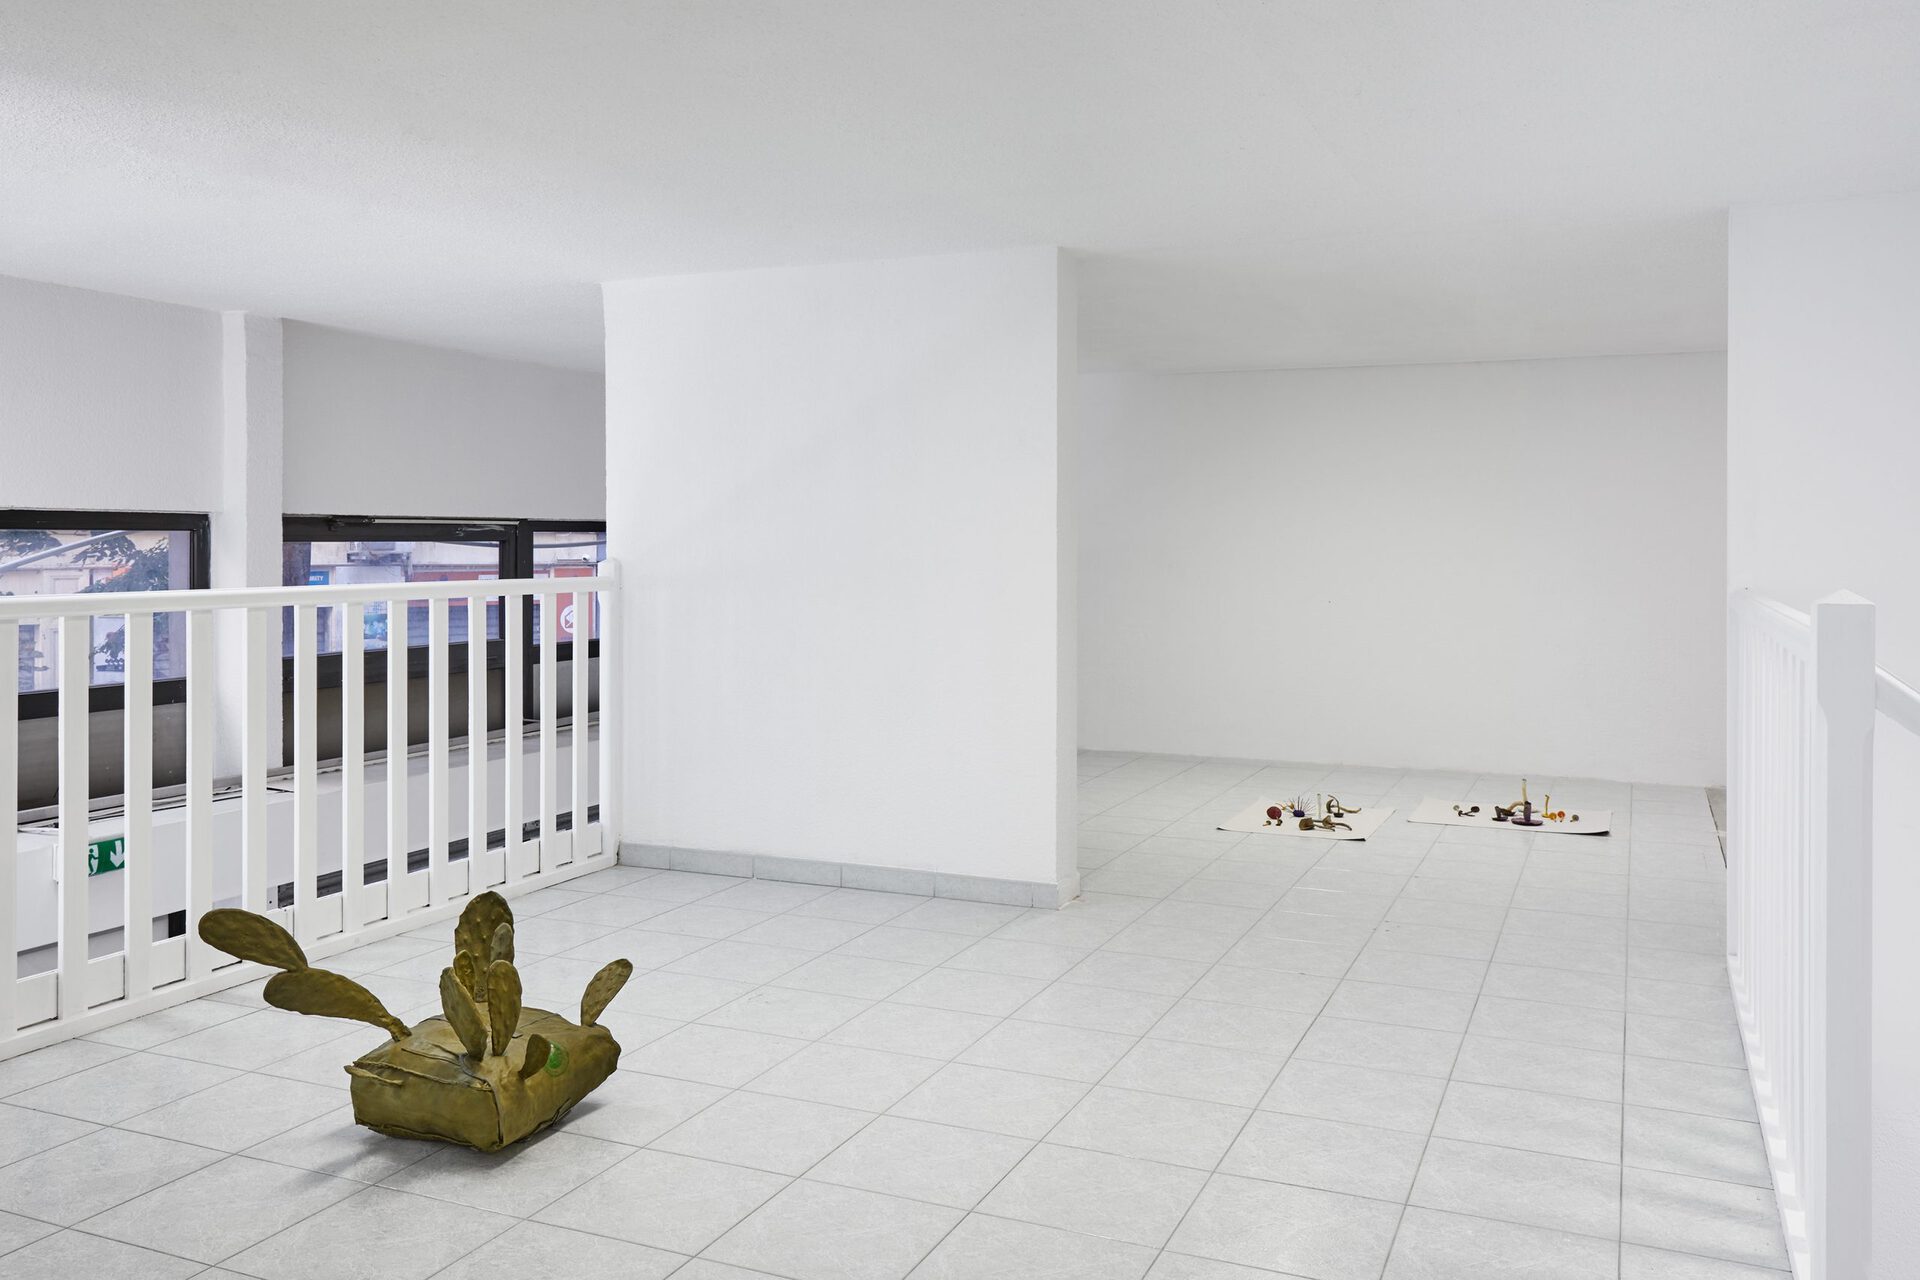 Hamish Pearch, 2020, Exhibition view at Belsunce Projects